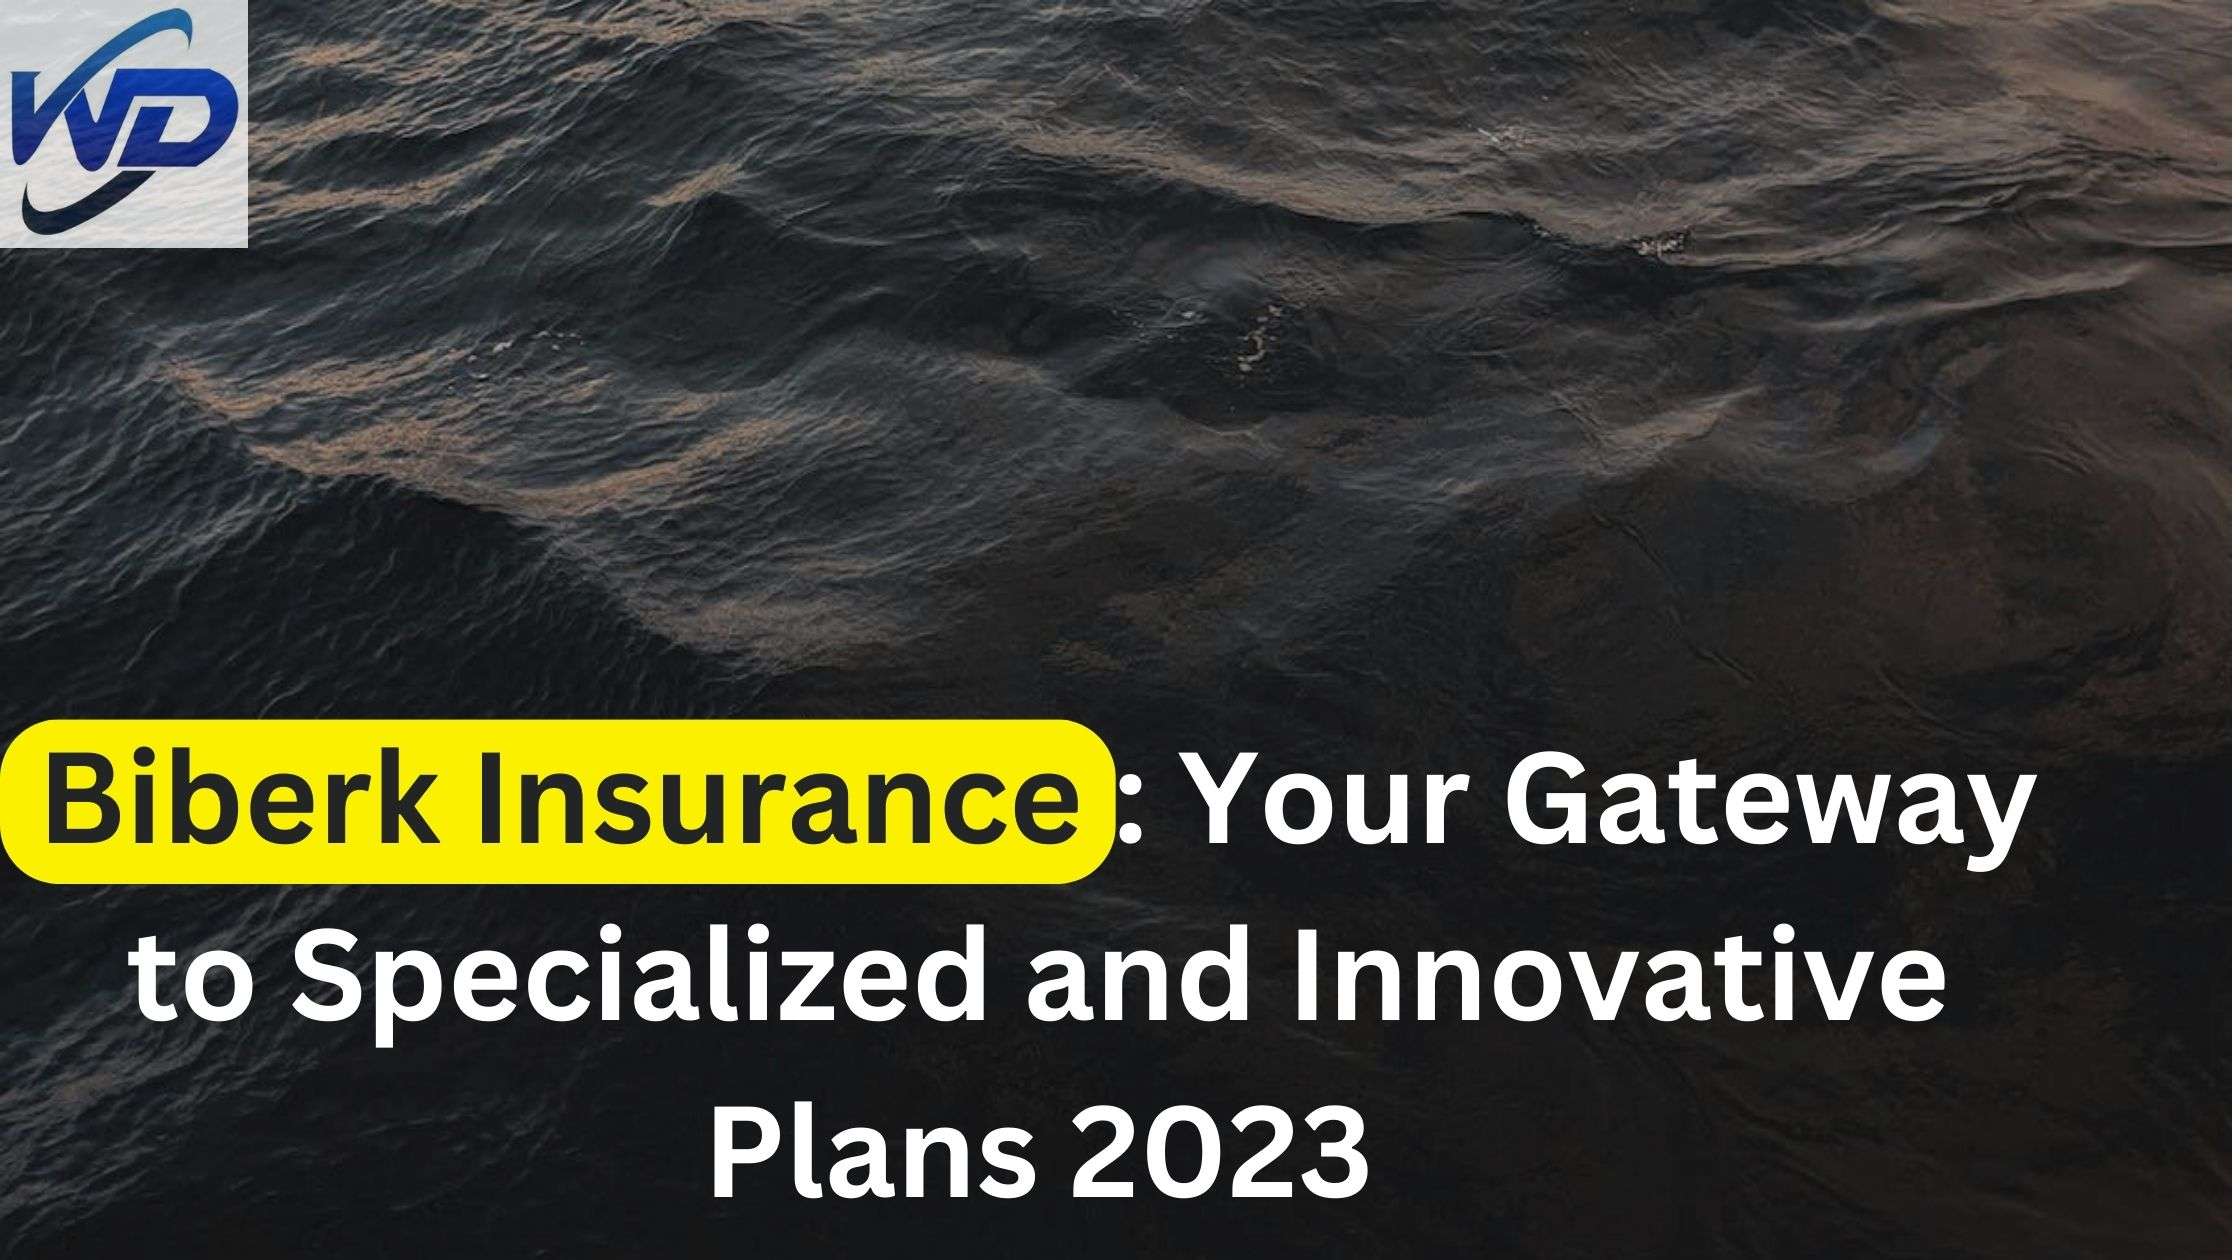 Biberk Insurance: Your Gateway to Specialized and Innovative Plans 2023